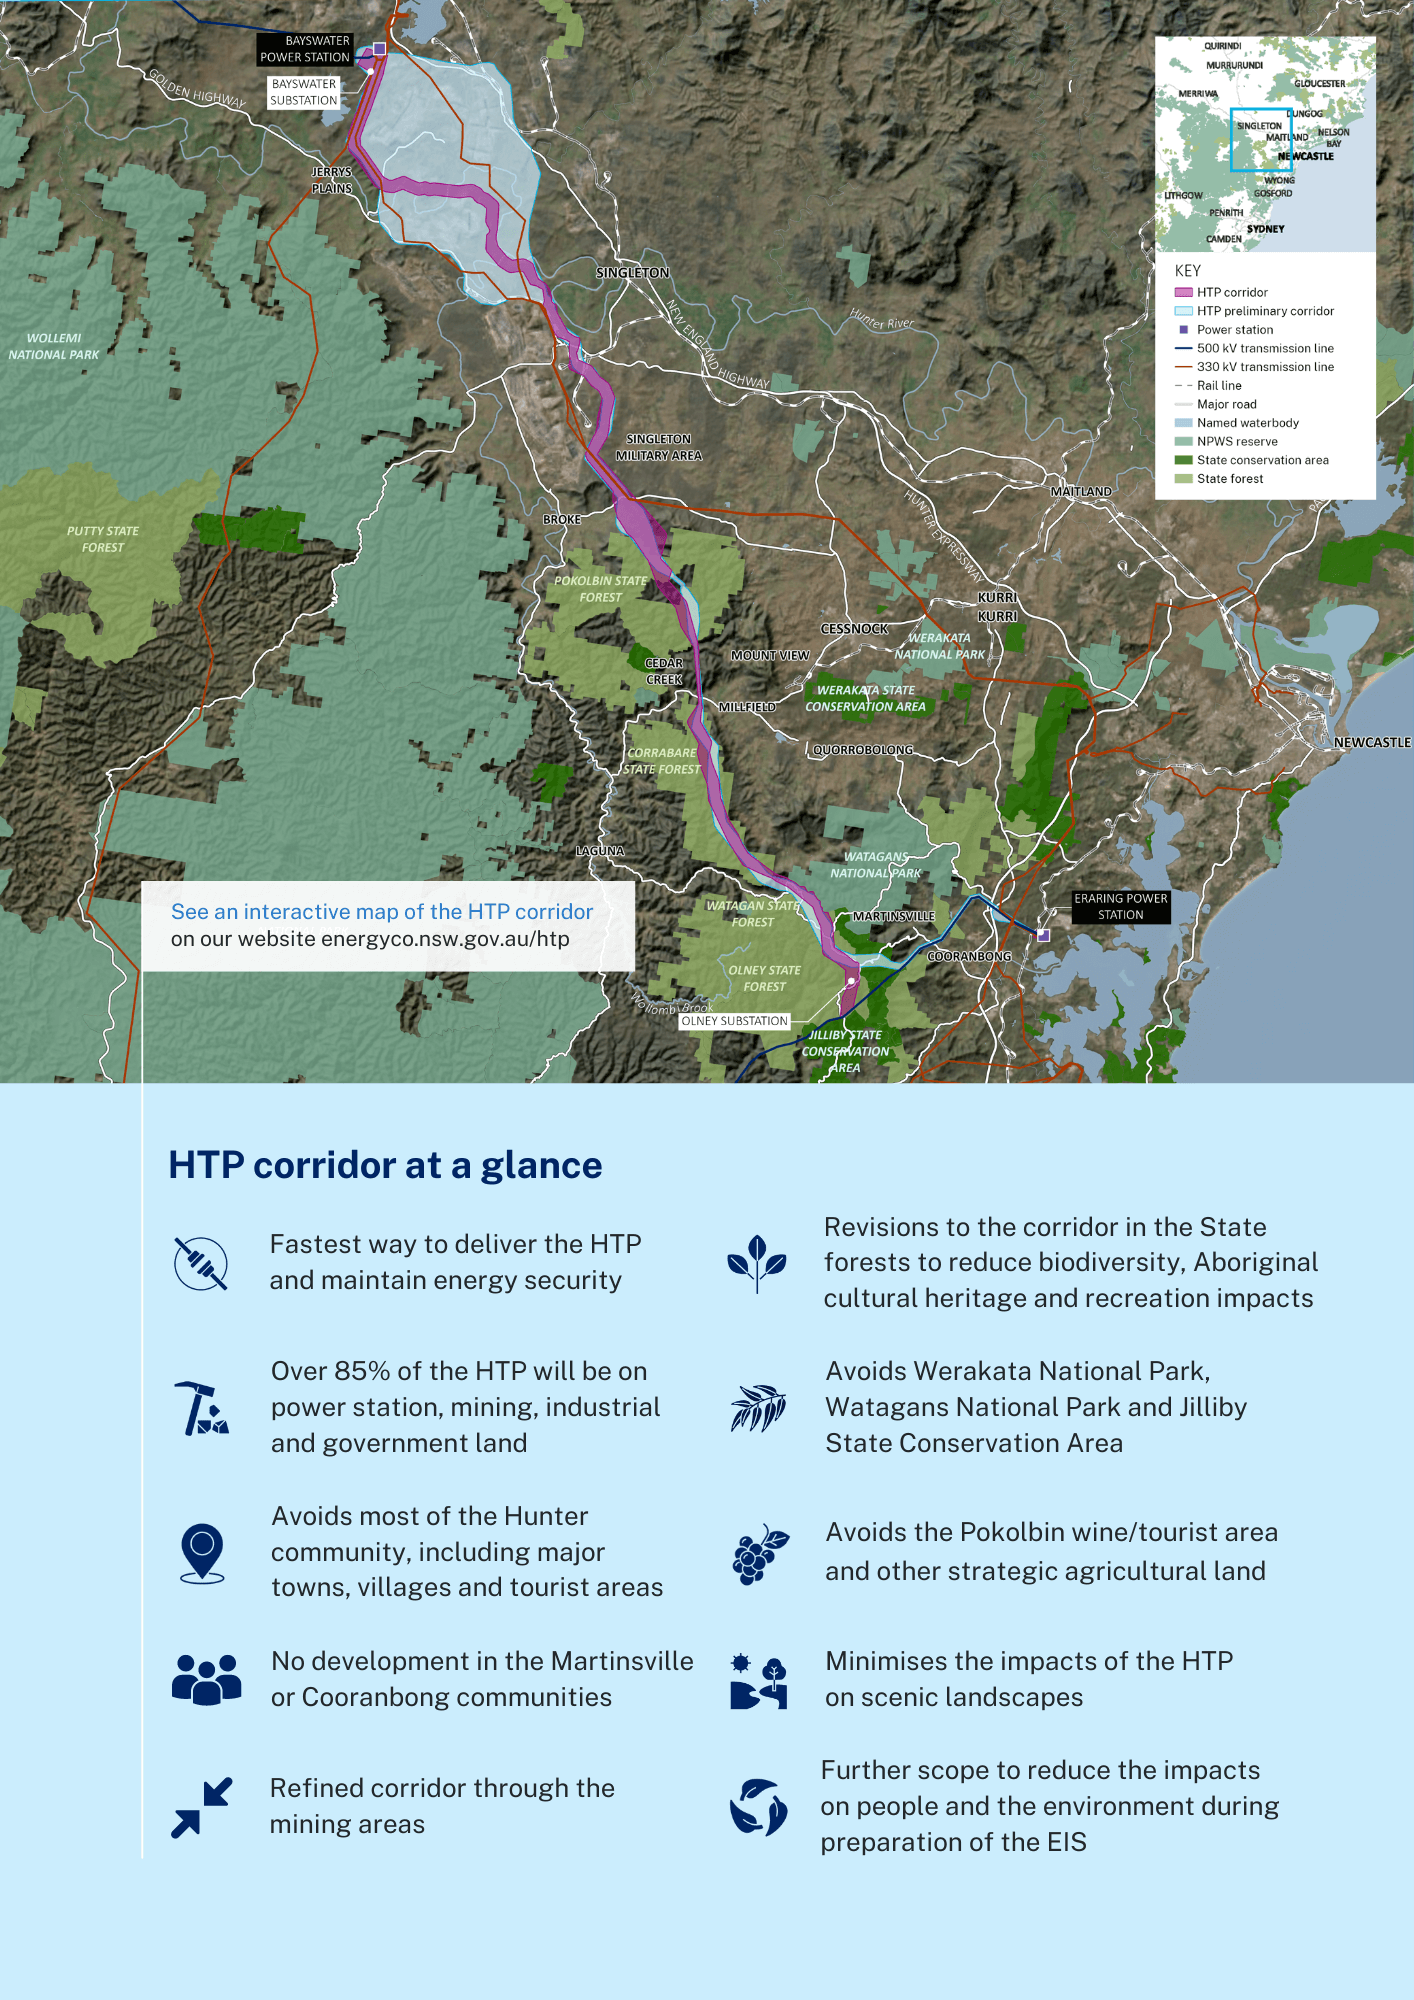 HTP revised corridor map with text